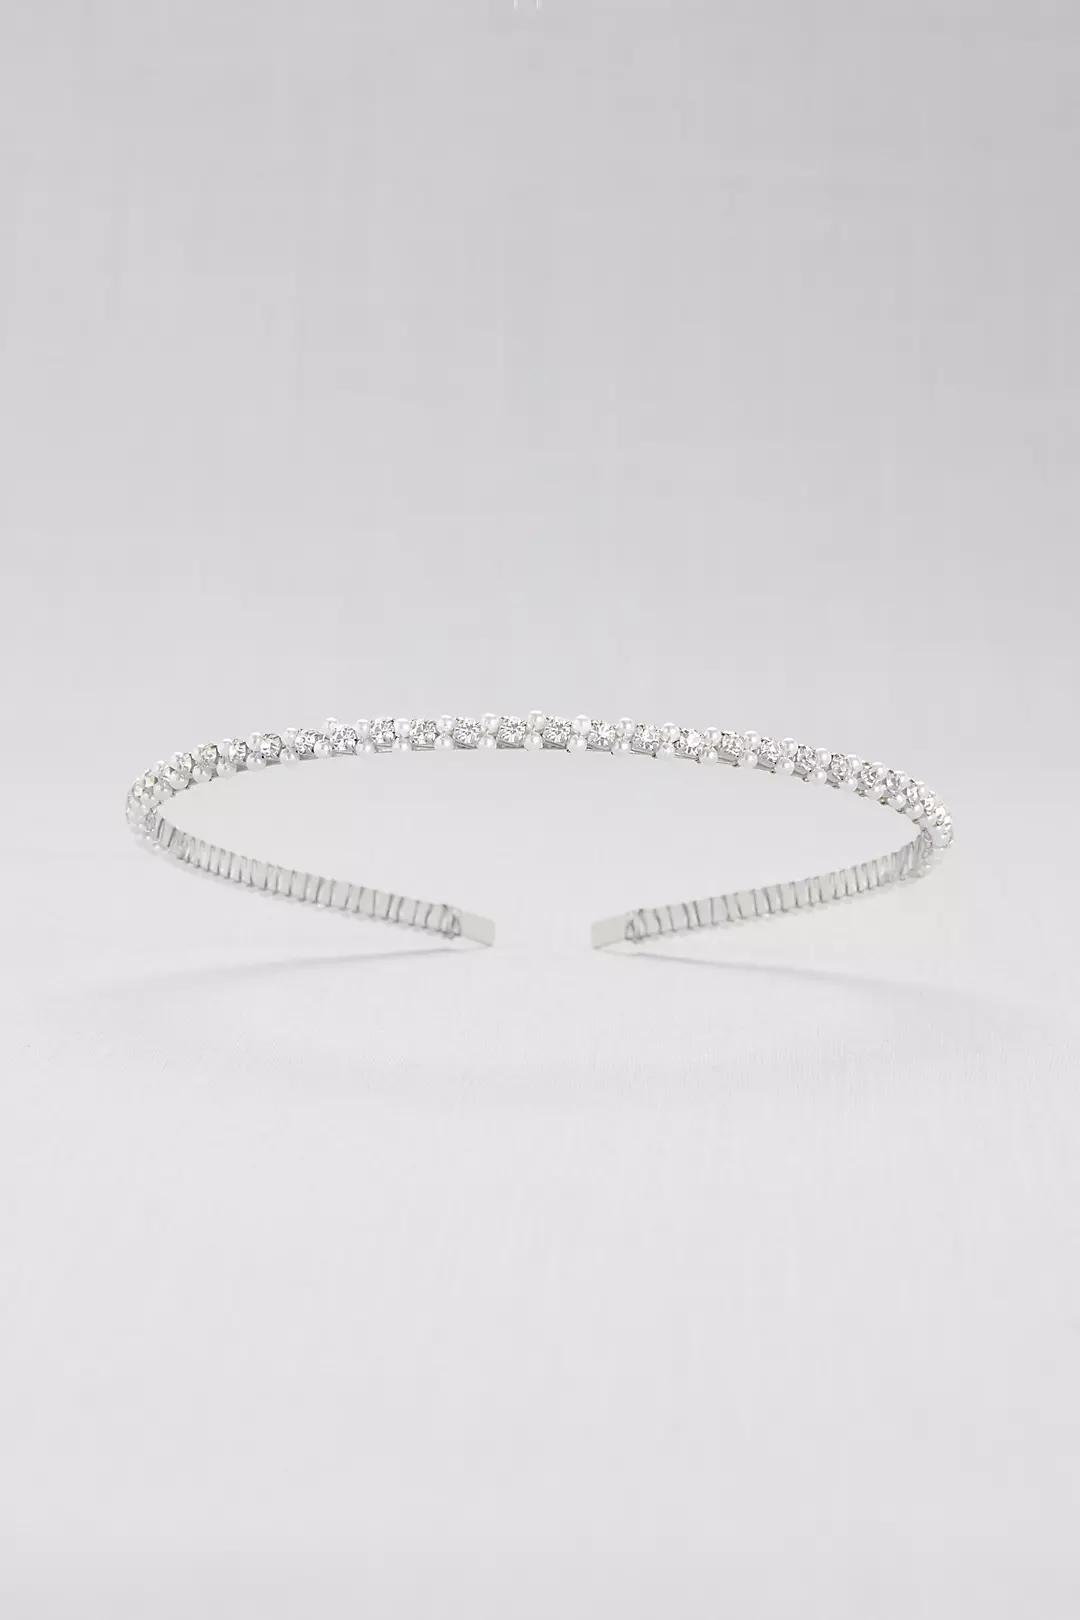 Double Pearl and Crystal Headband Image